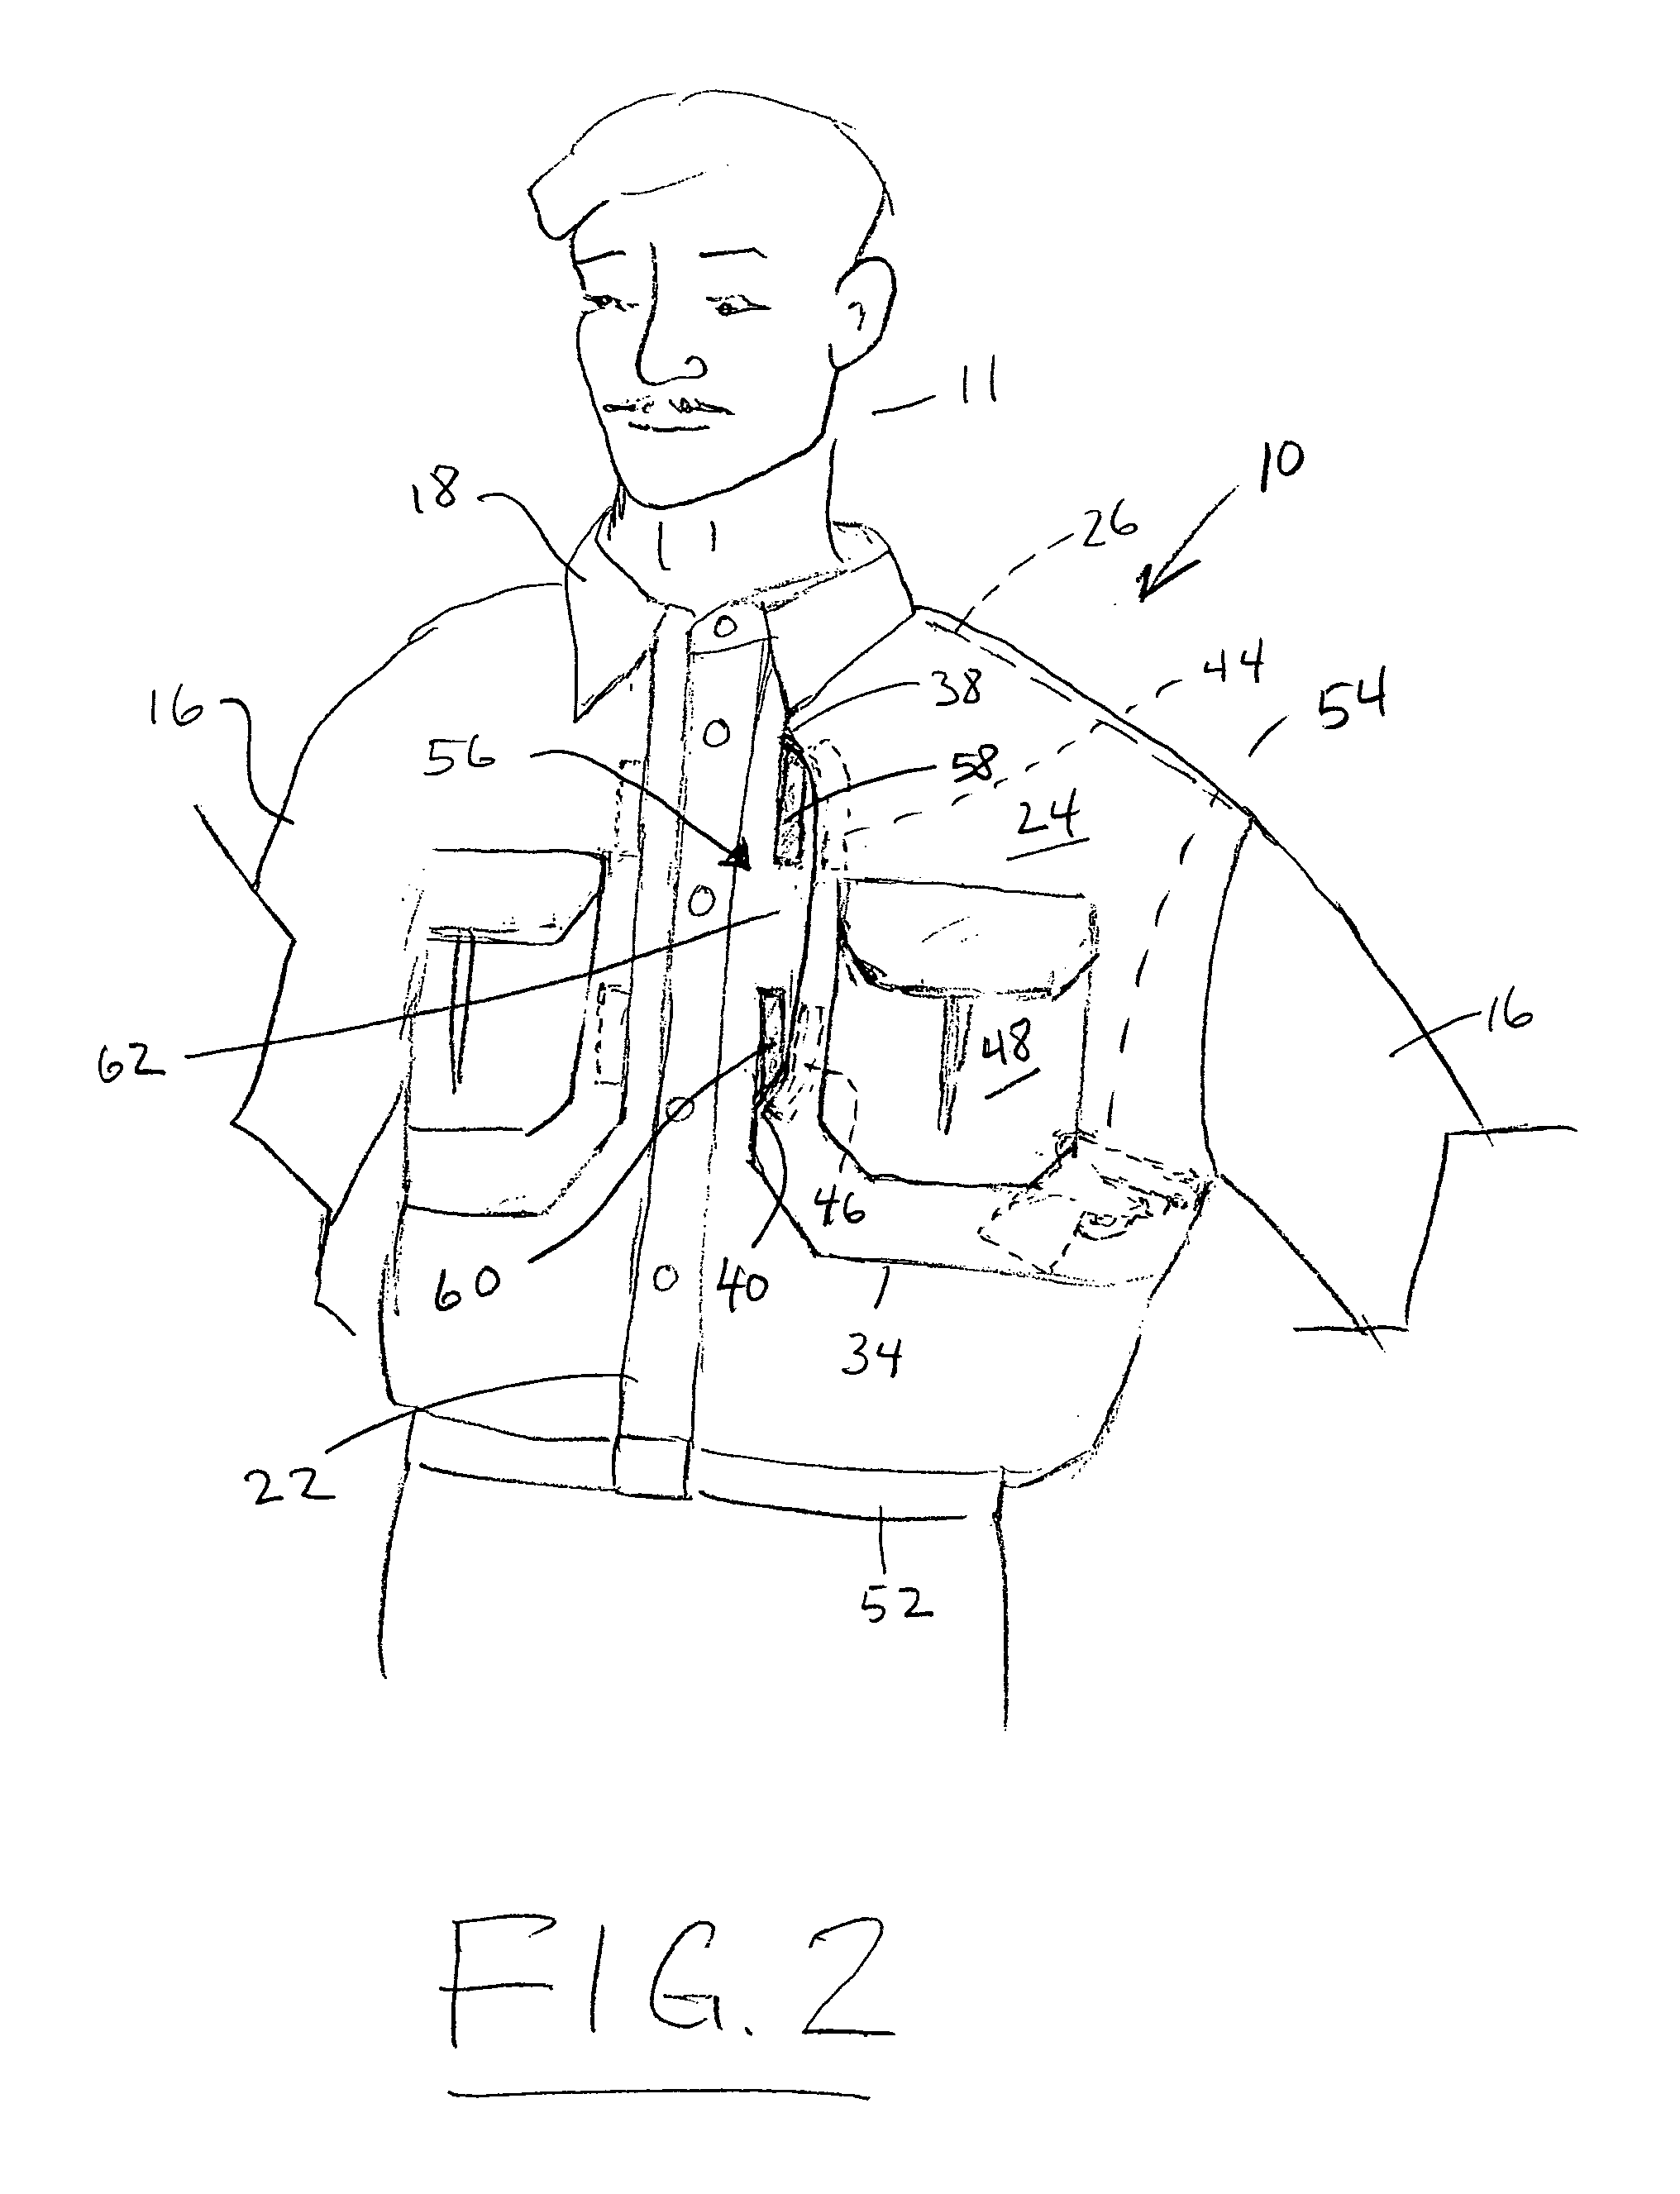 Tactical shirt for carrying a concealed weapon